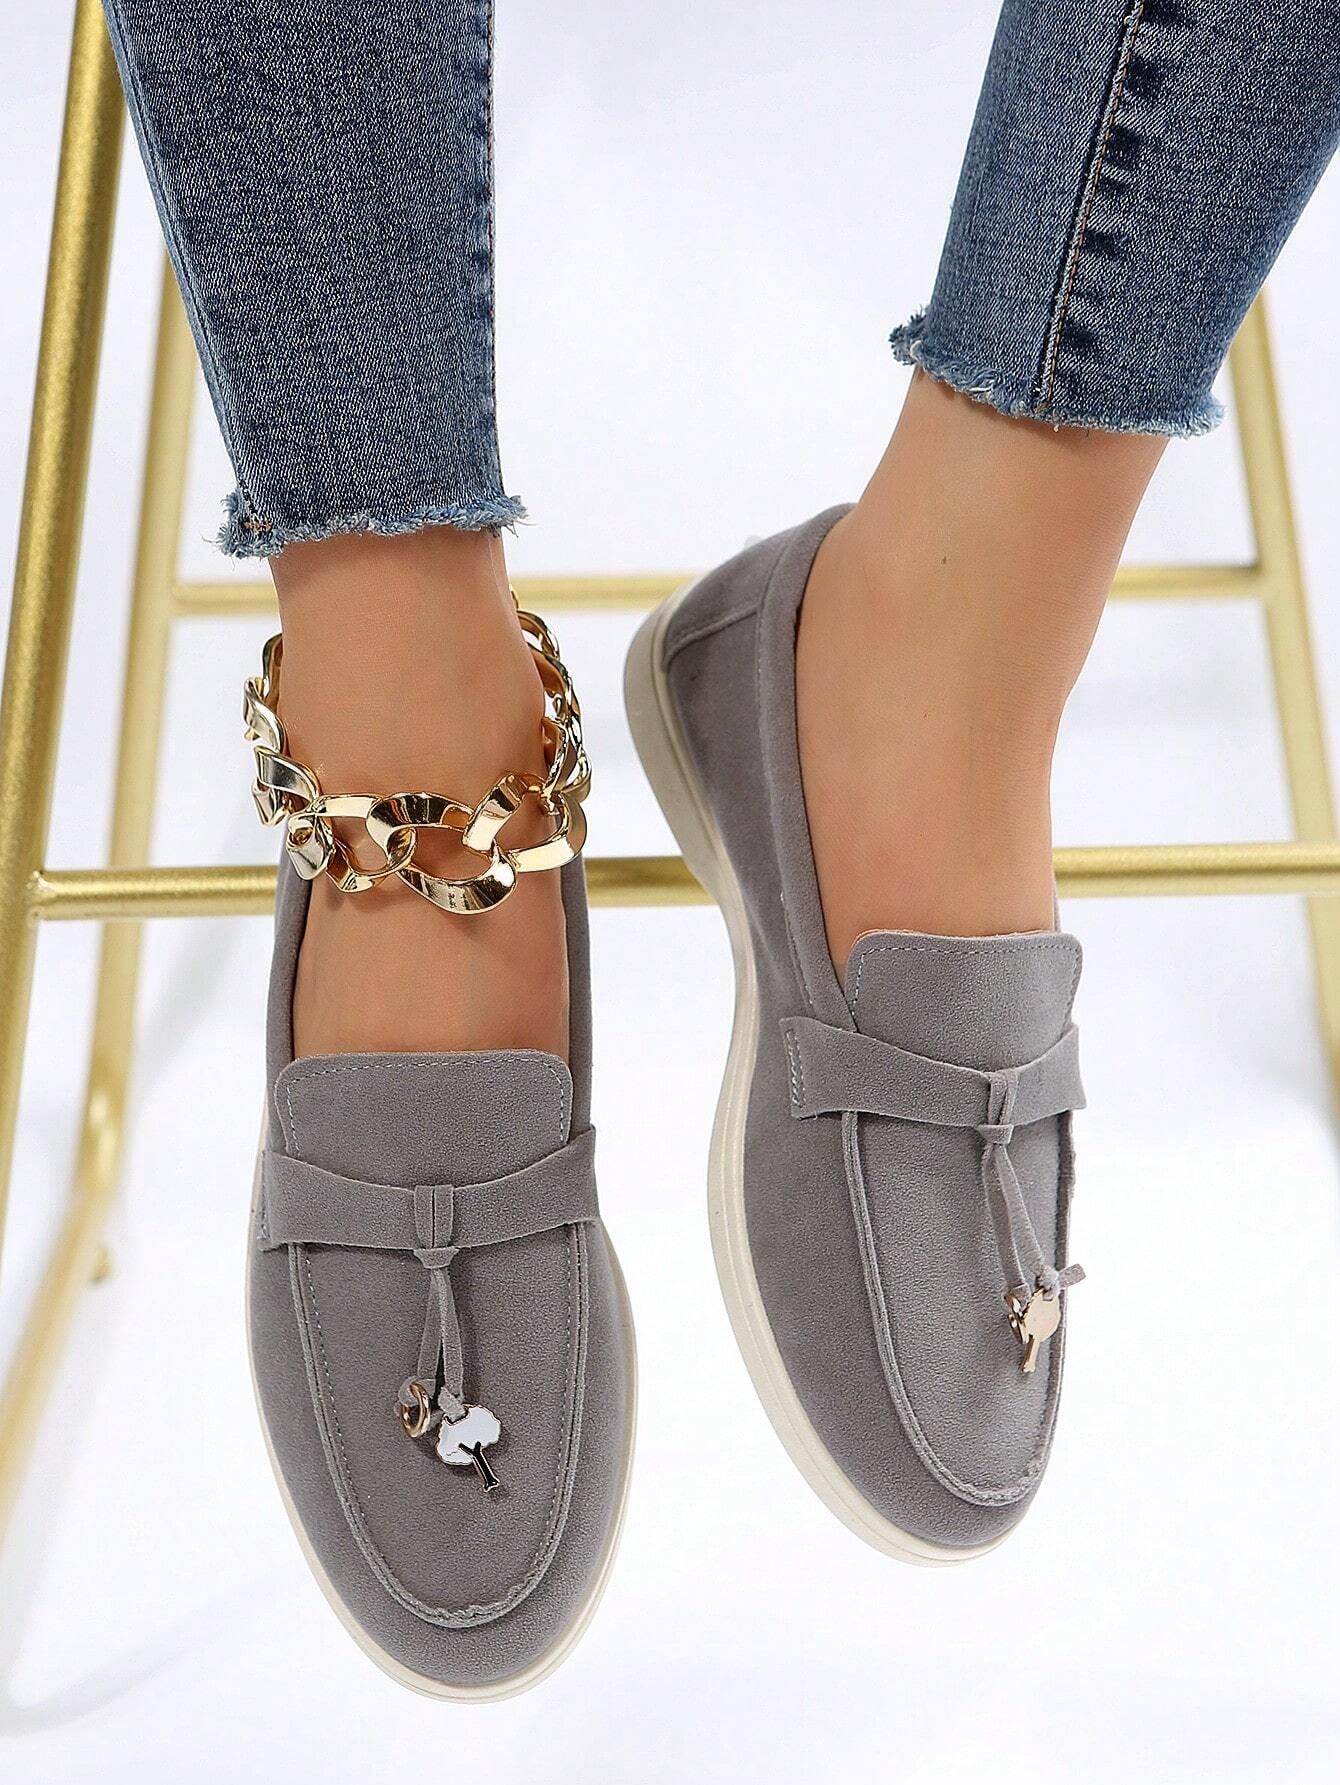 Women's Fashionable And Simple Grey Loafers With Metallic Ornament | SHEIN